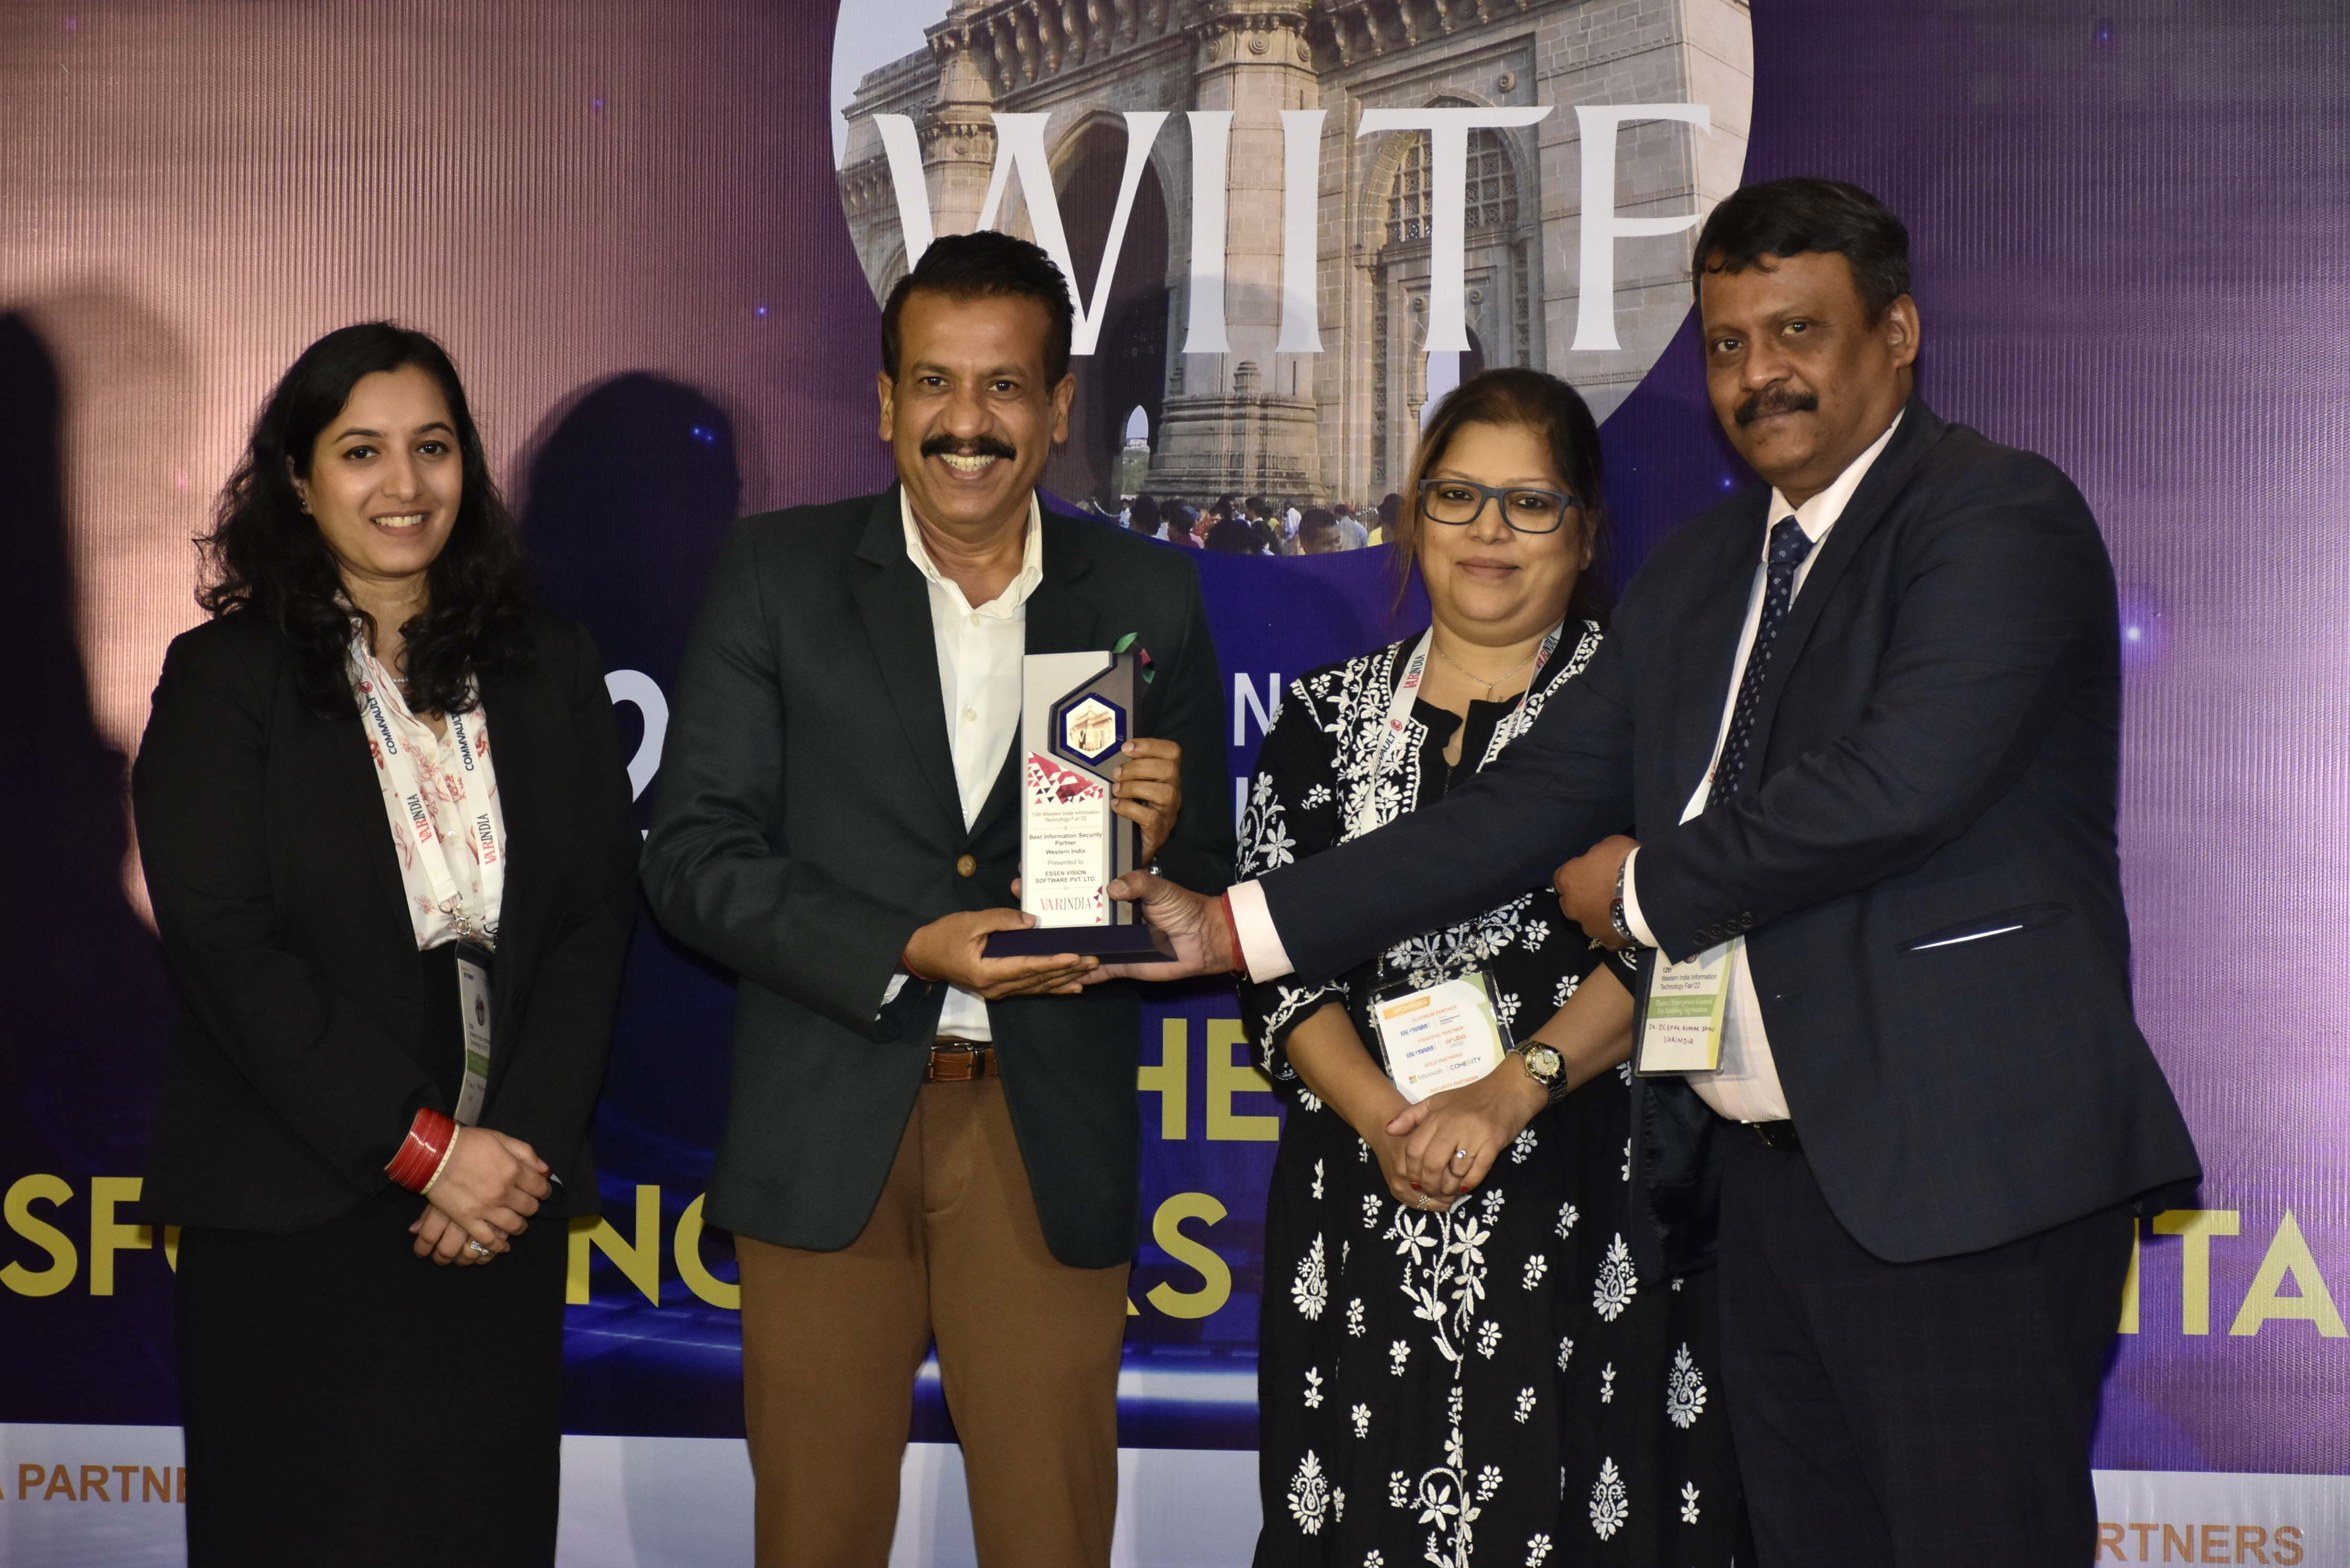 The Best Information Security Partner, Western India was bagged by Essen Vision Software Pvt. Ltd.